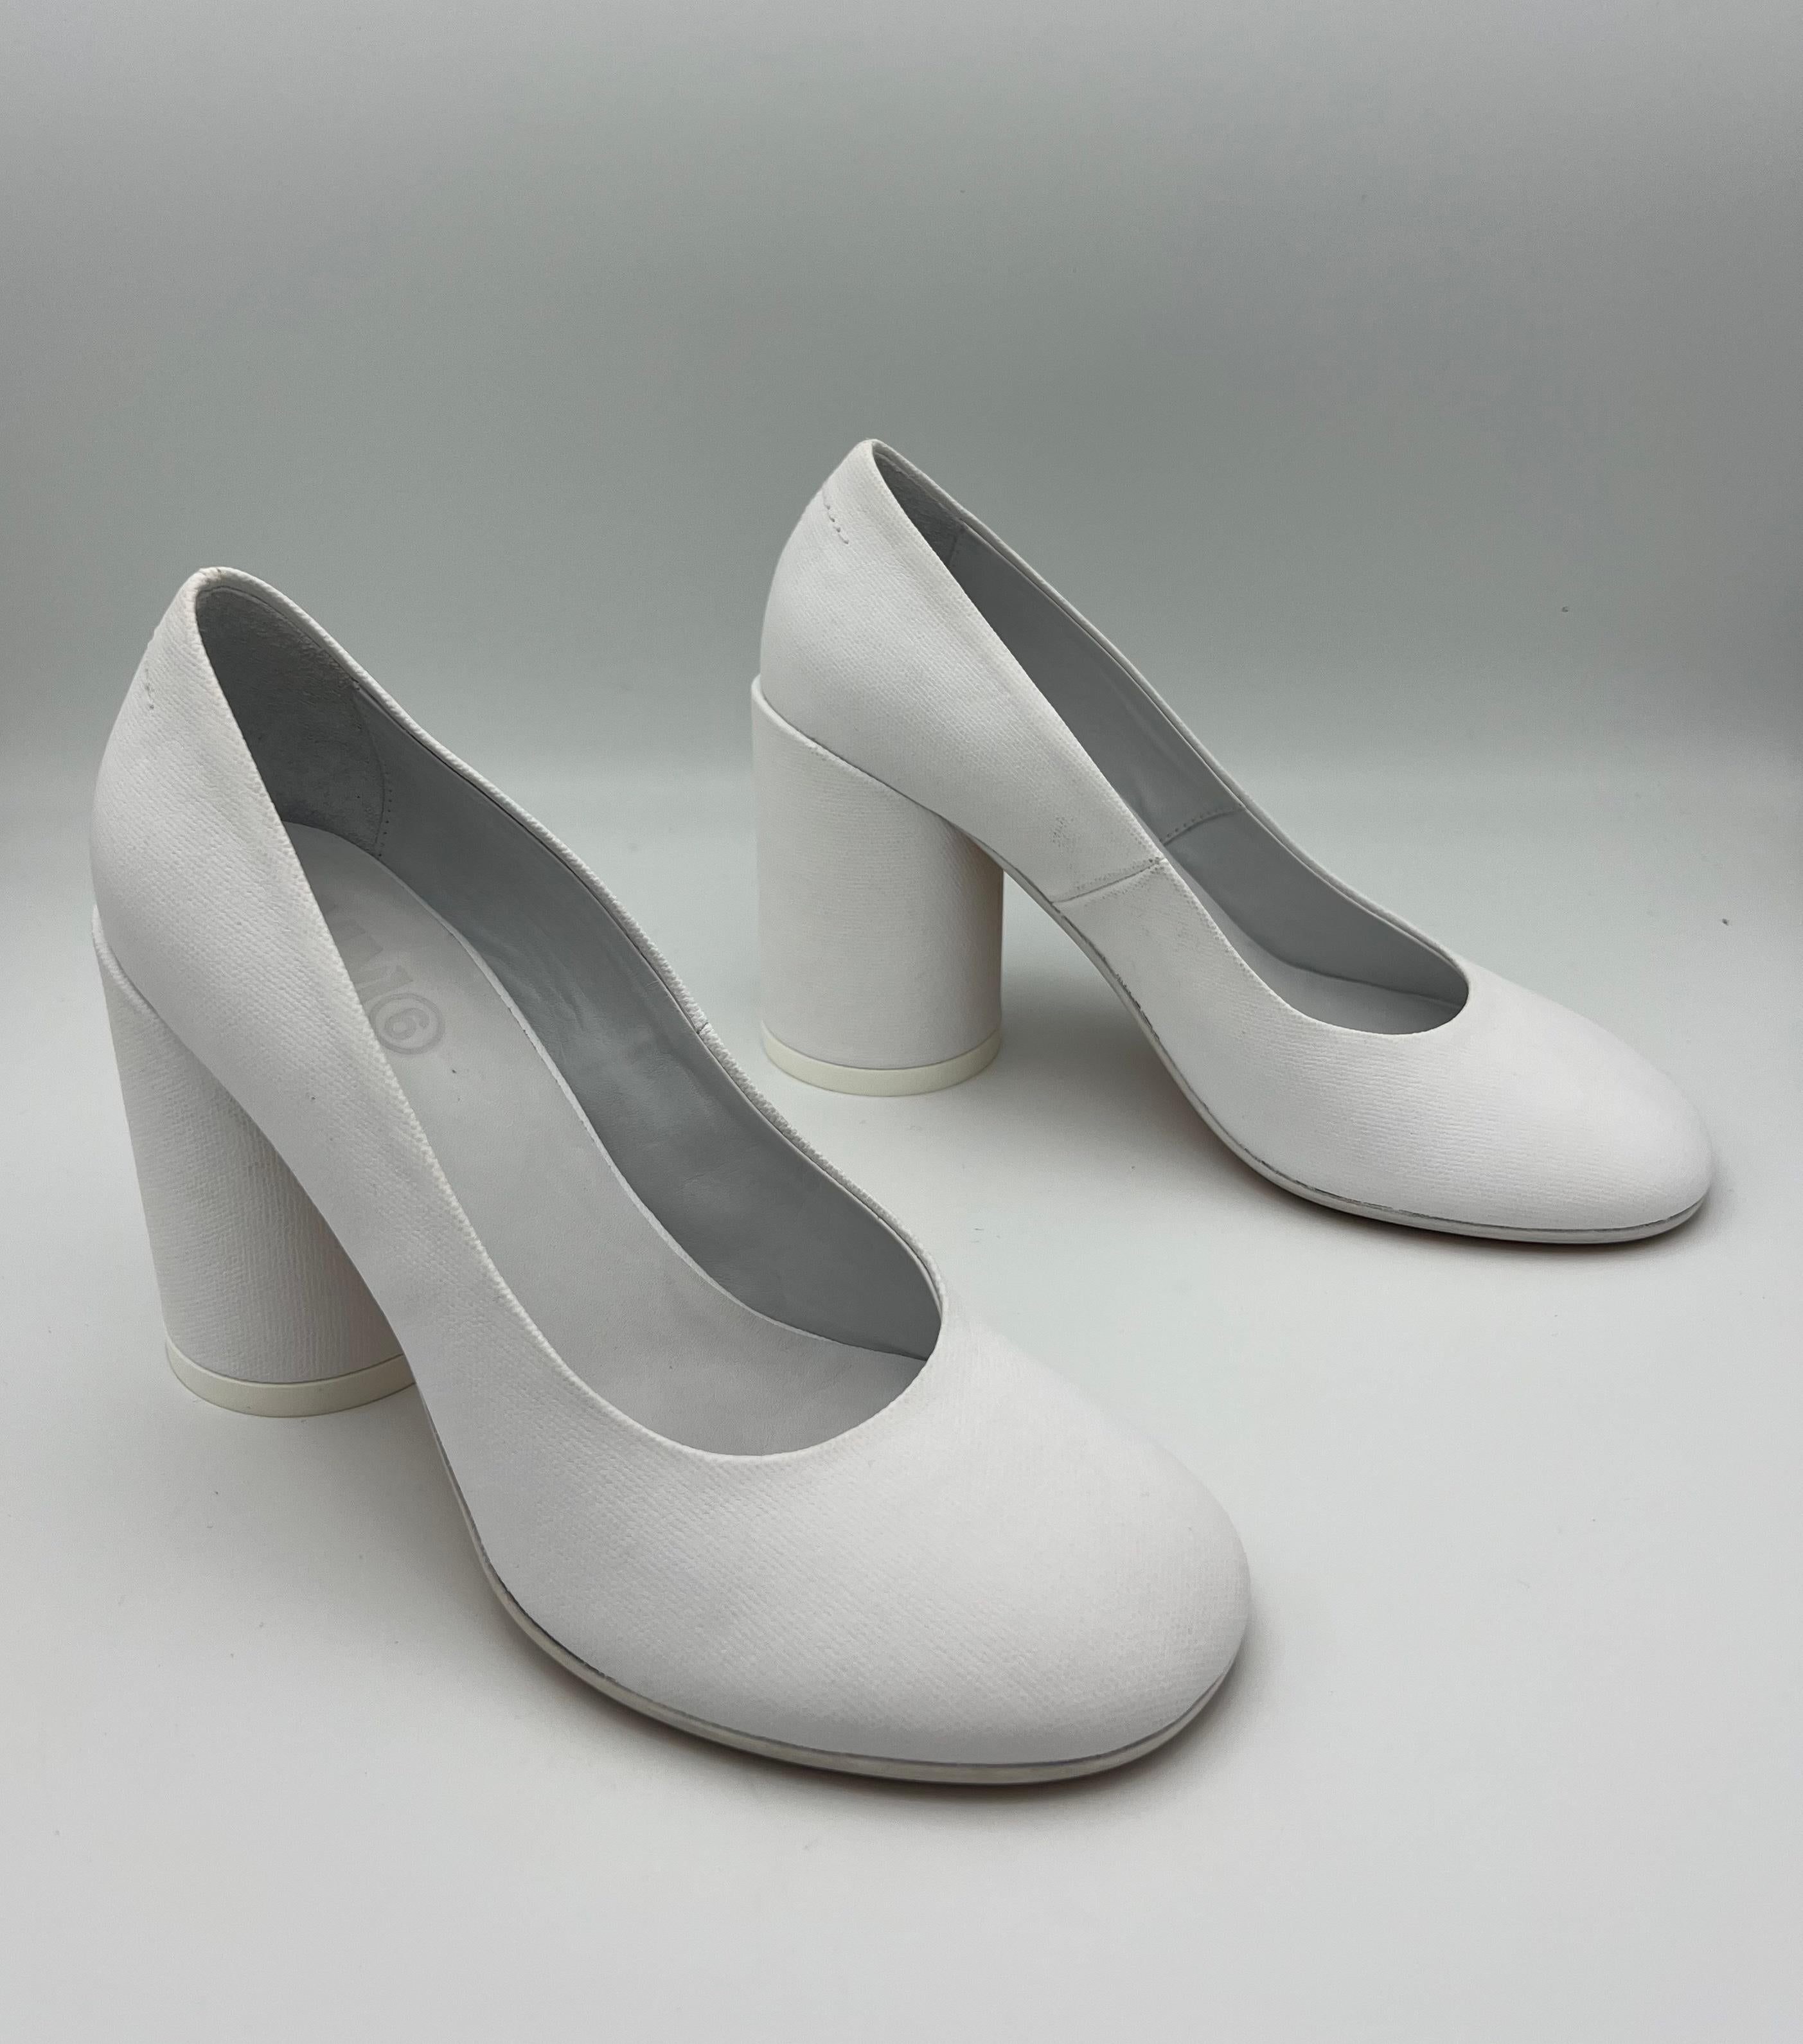 MM6 Maison Margiela White Heel Shoes, Size 38 In Excellent Condition For Sale In Beverly Hills, CA